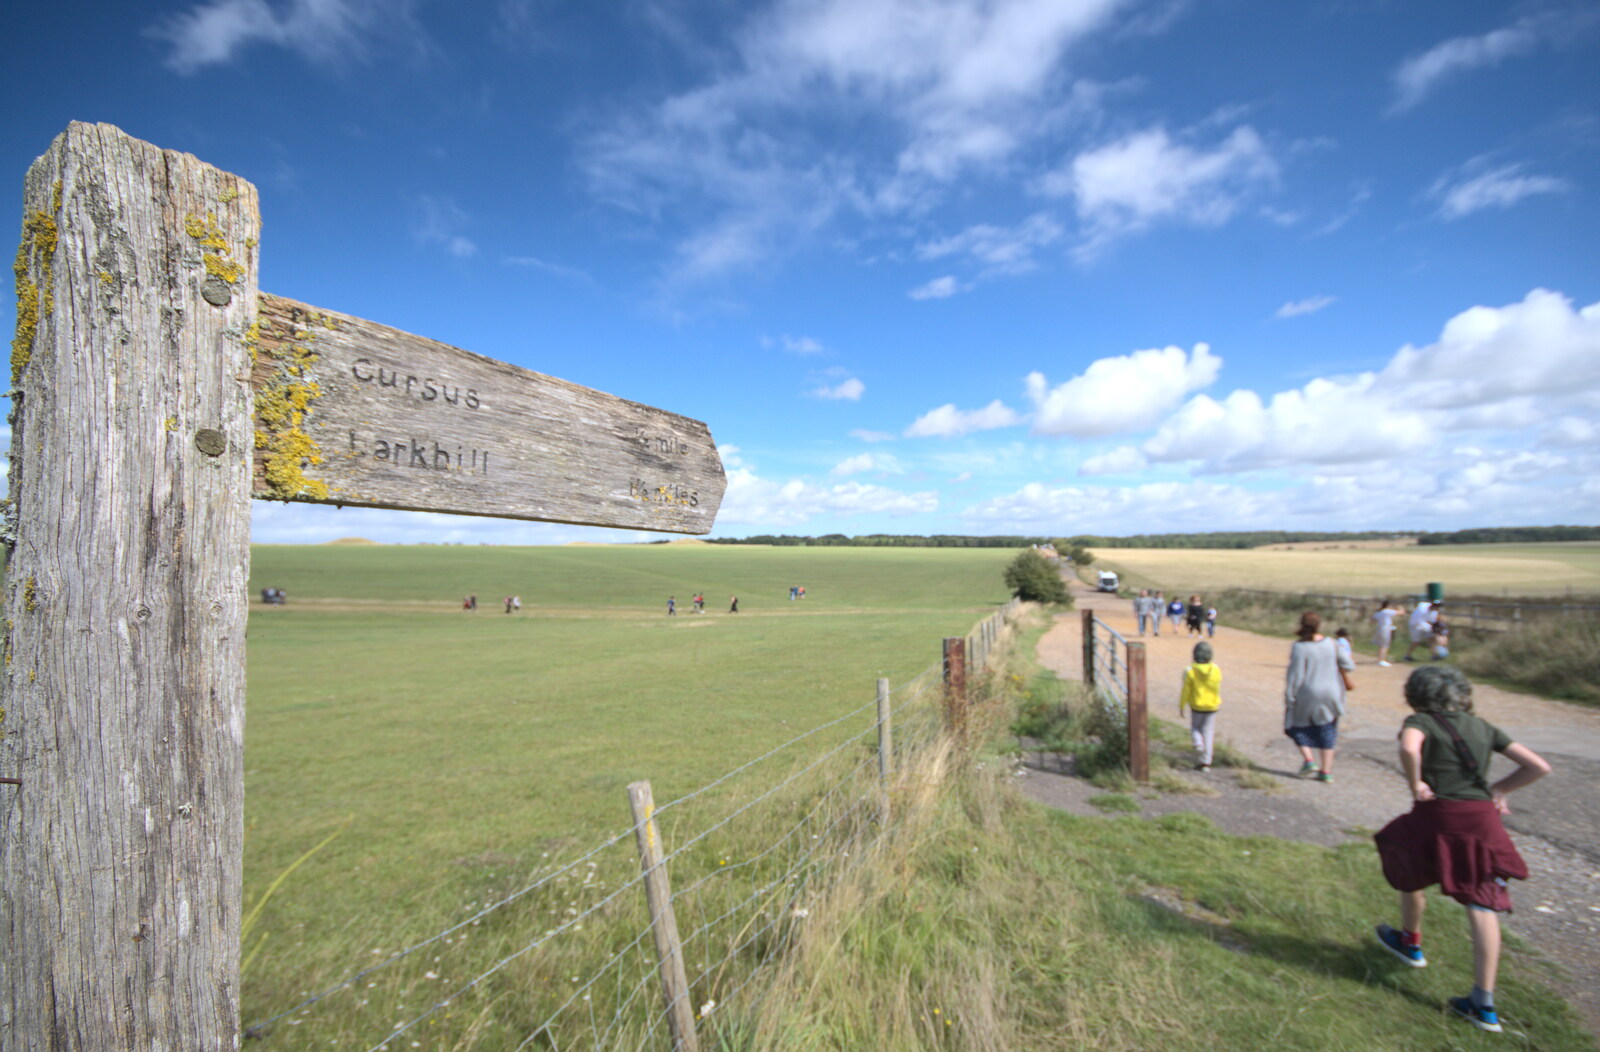 A sign points the way back to the Cursus from Stone Circles: Stonehenge and Avebury, Wiltshire - 22nd August 2020